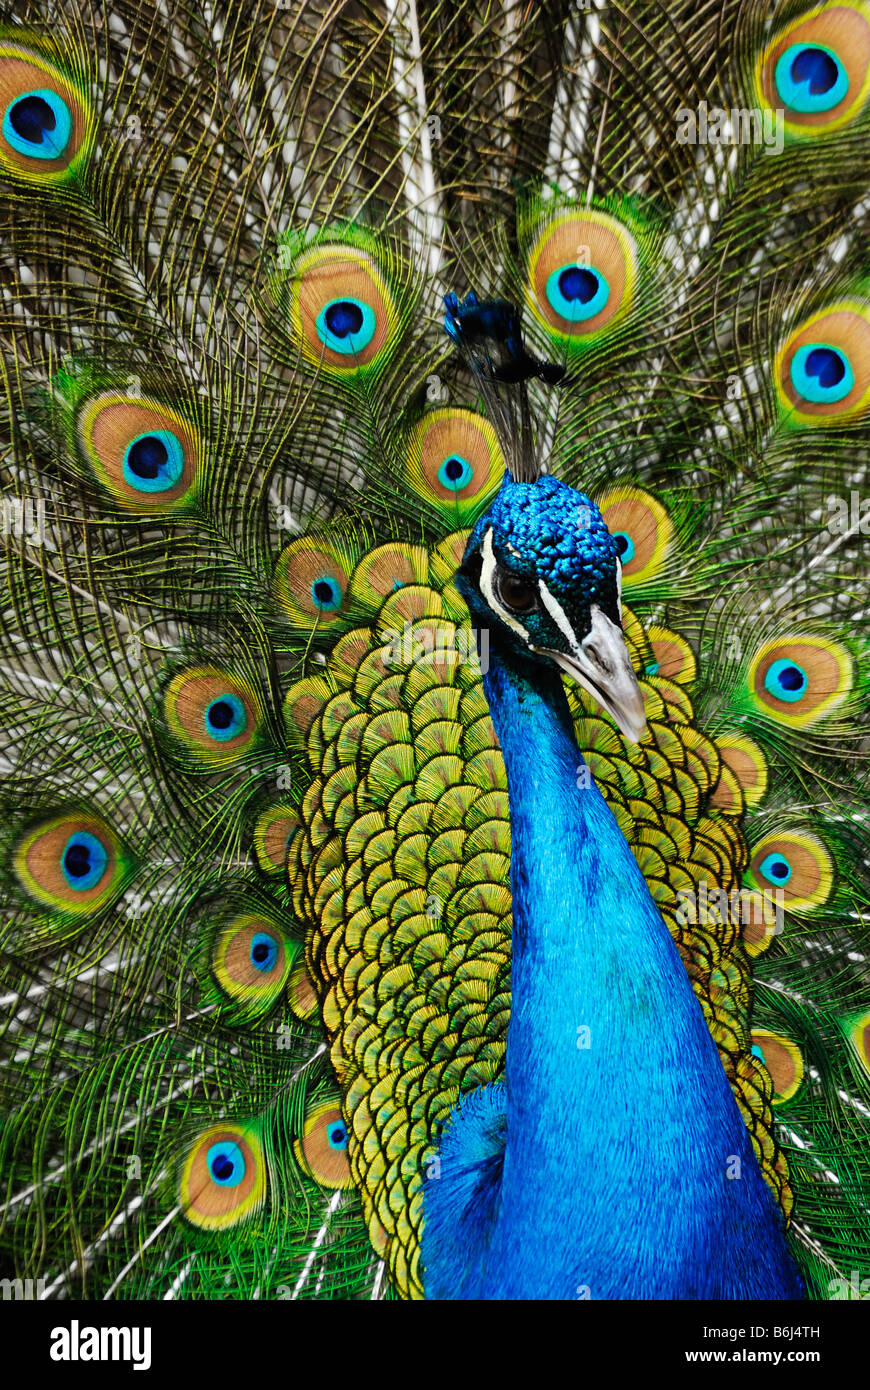 Beautiful male peacock colorful,High quality Canvas print choose your size